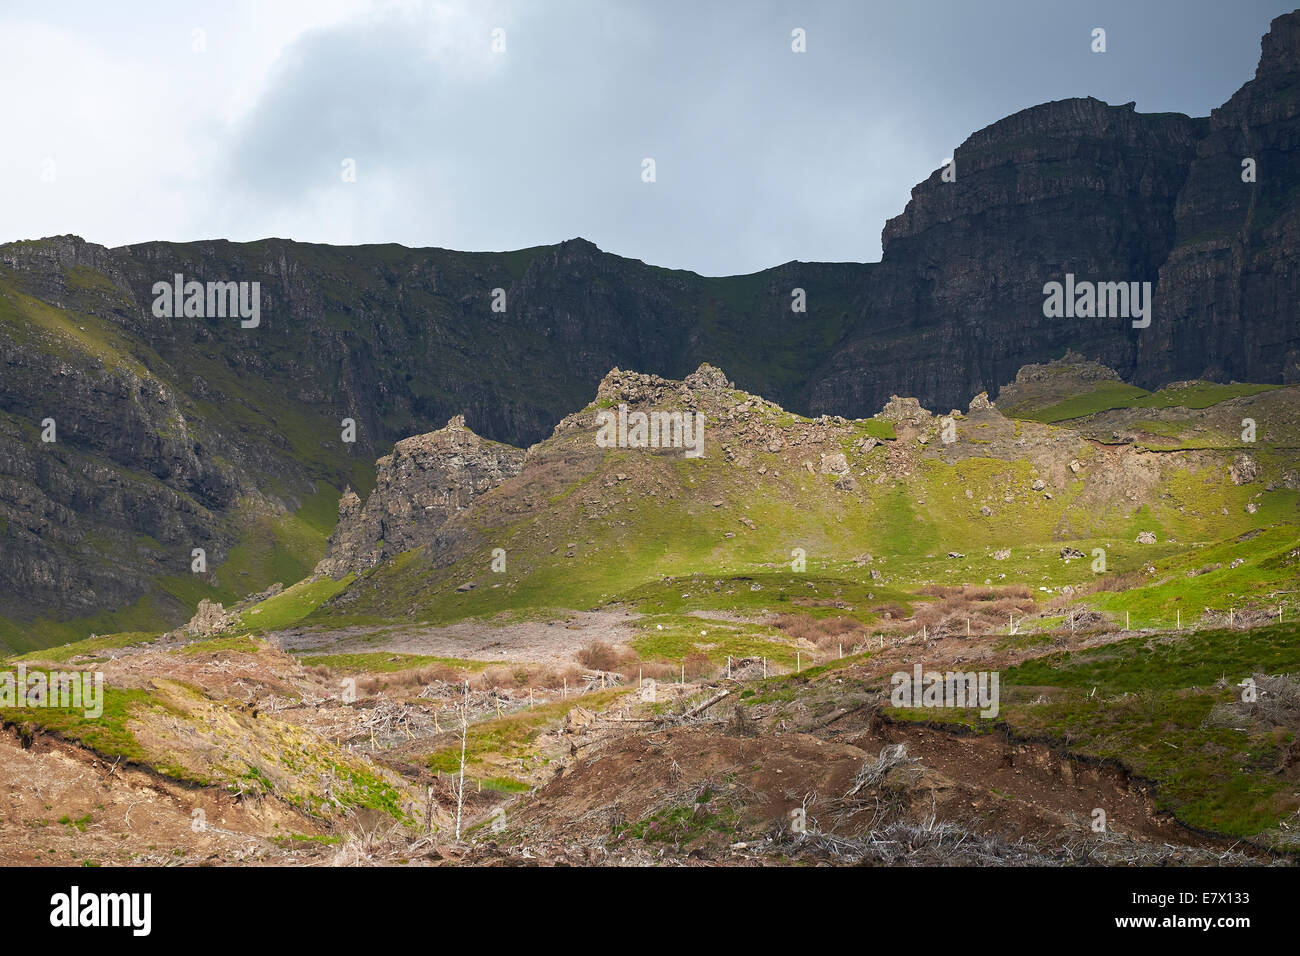 The deforested land near the Old Man of Storr on the Isle of Skye. Stock Photo